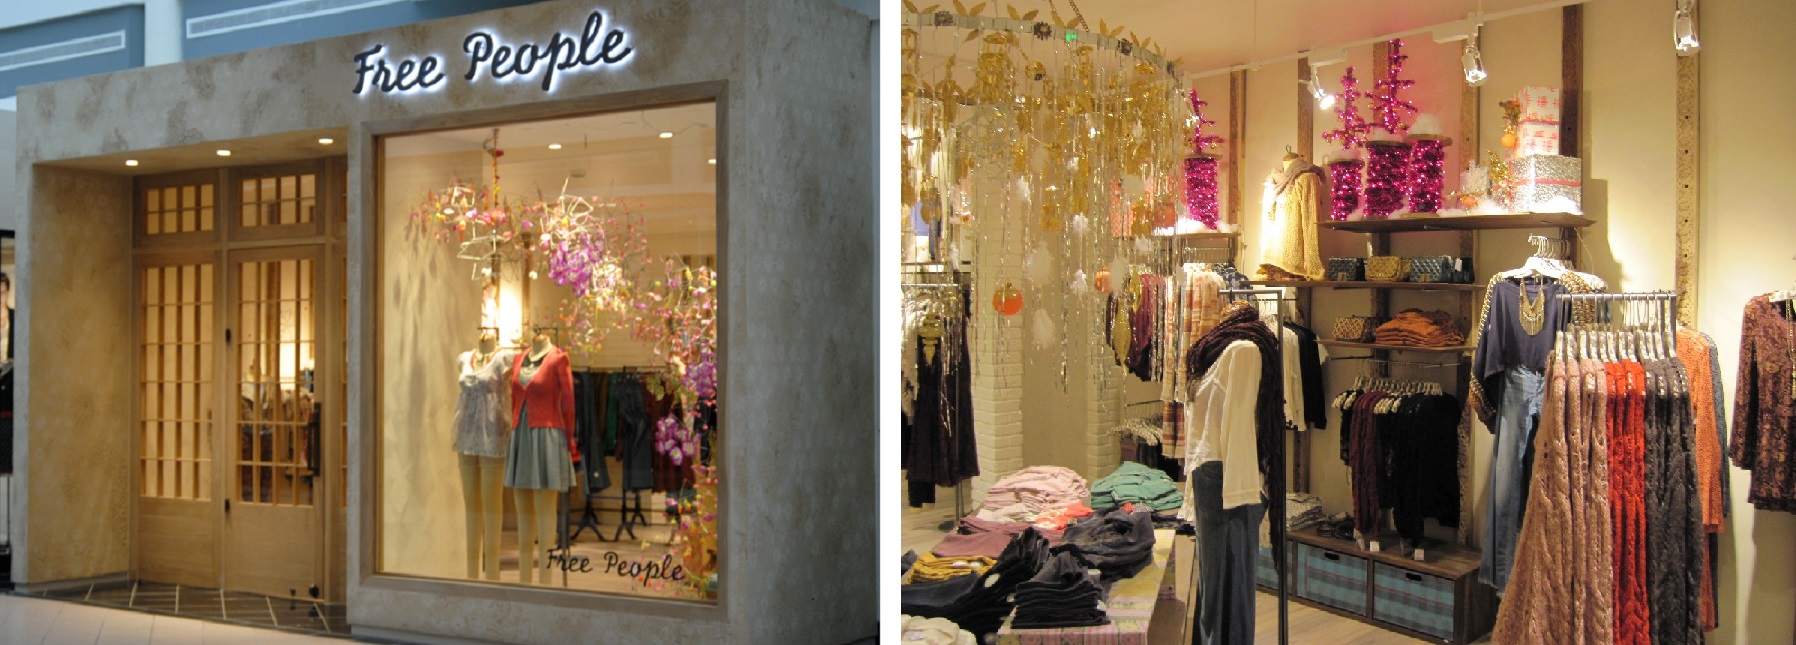 free people store - Google Search  Free people store, Retail inspiration,  Store decor